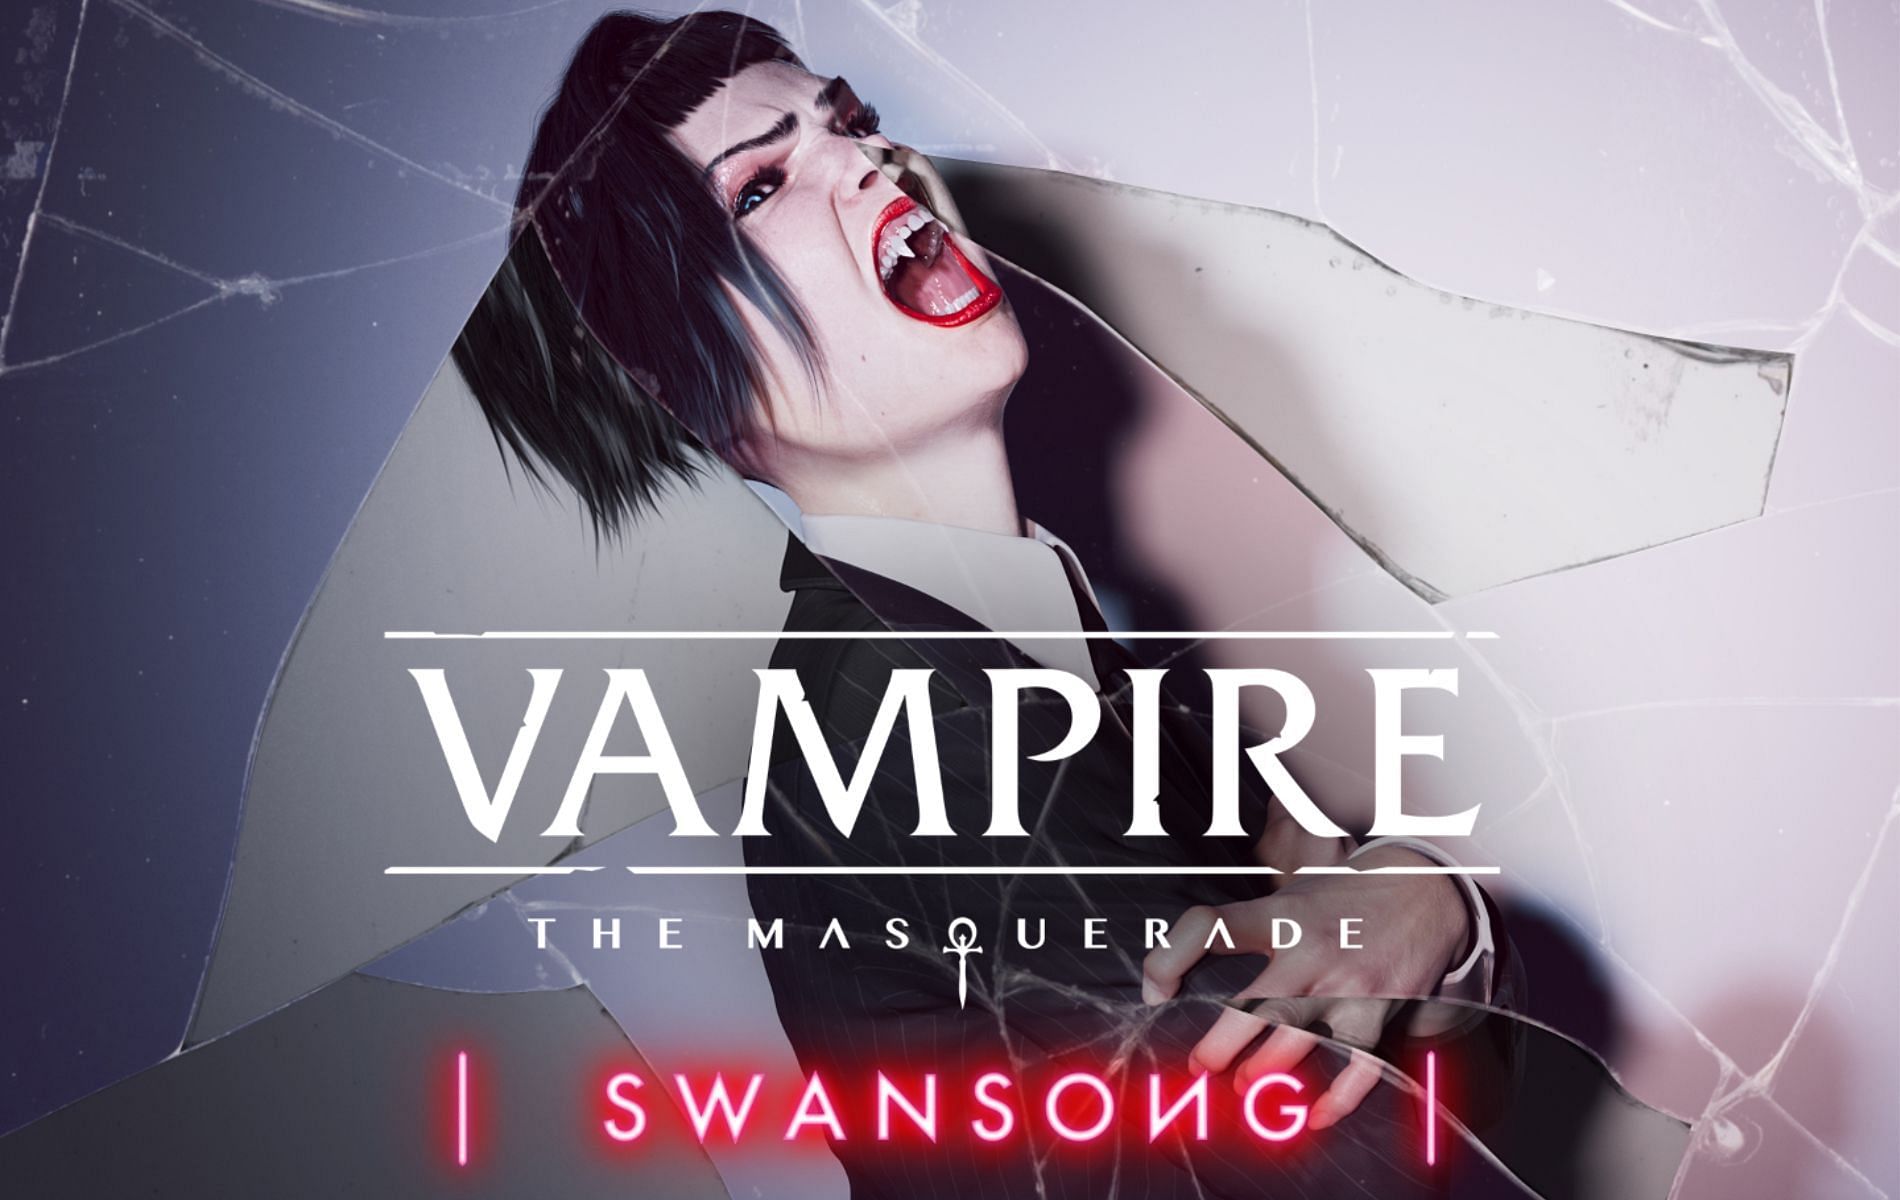 Vampire: The Masquerade - Swansong is a narrative RPG based on the